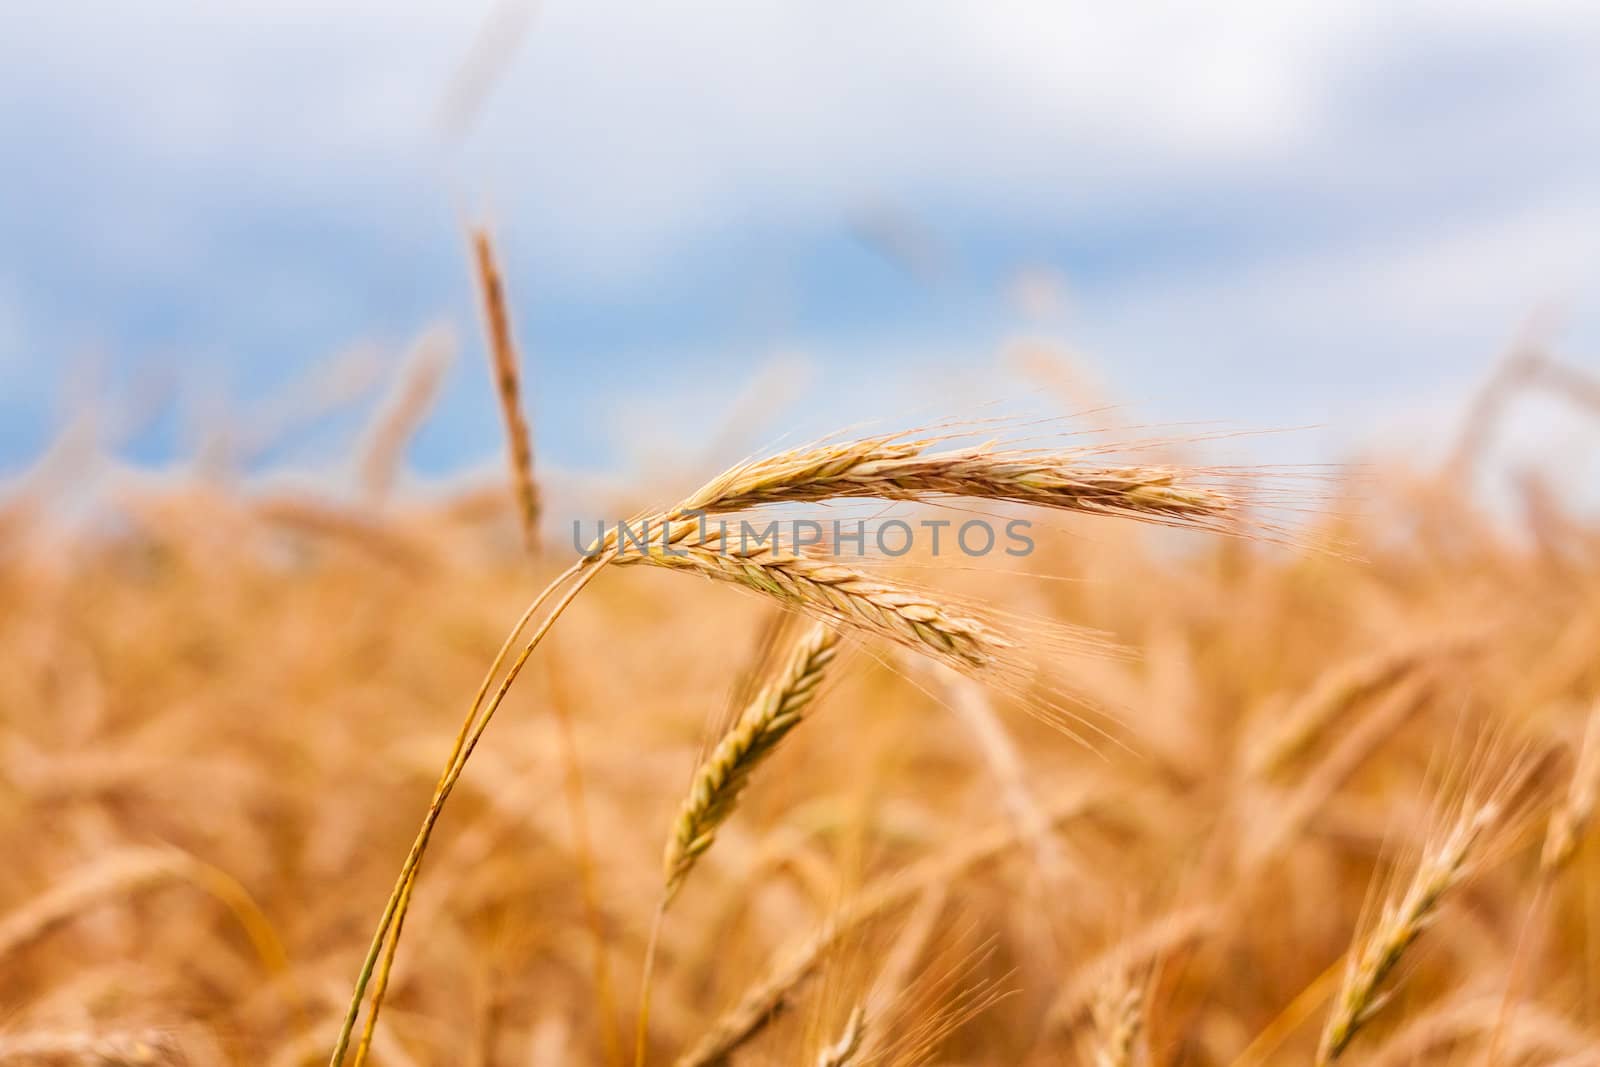 A Barley Field With Shining Golden Barley Ears In Late Summer